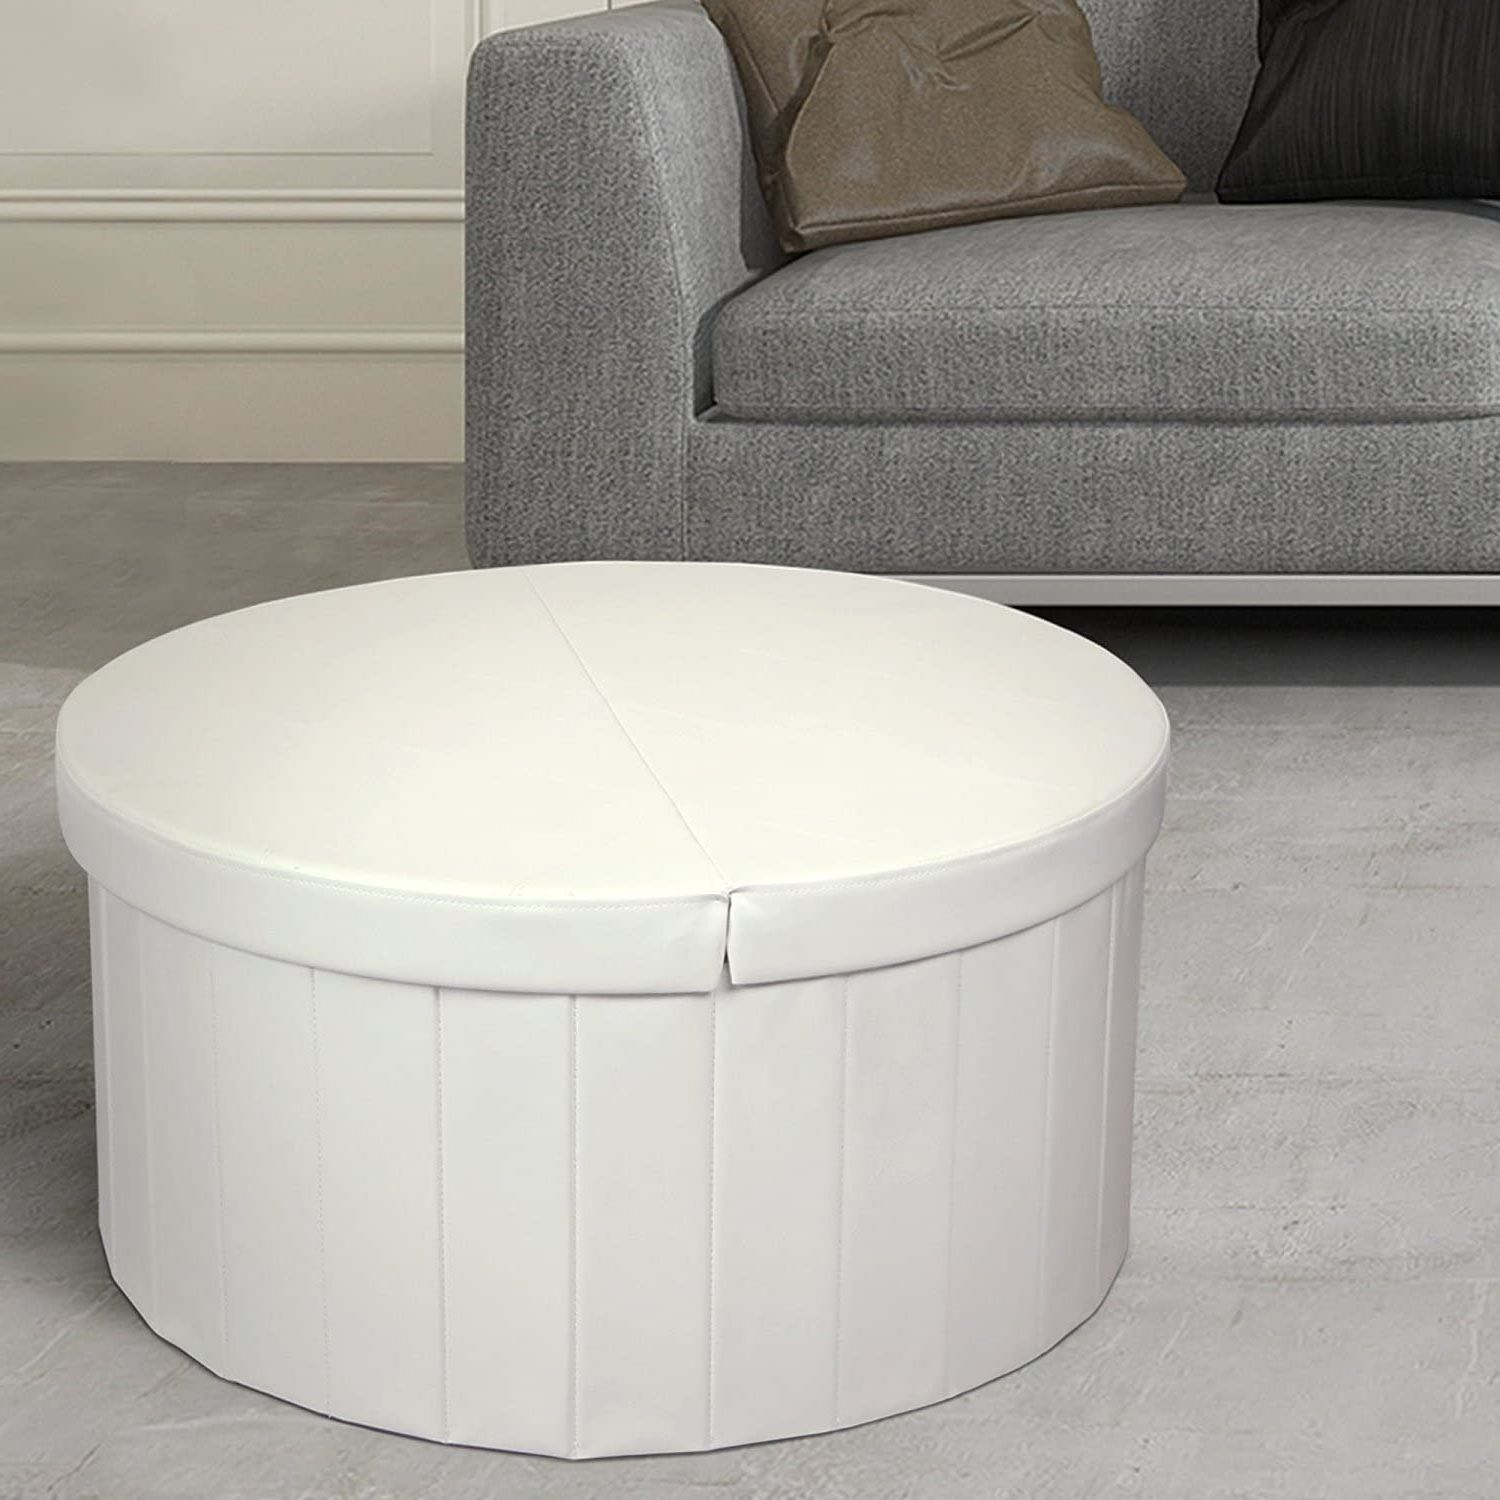 Best Round White Leather Ottoman Tufted – Your House Inside Fashionable Gray And Cream Geometric Cuboid Pouf Ottomans (View 9 of 10)